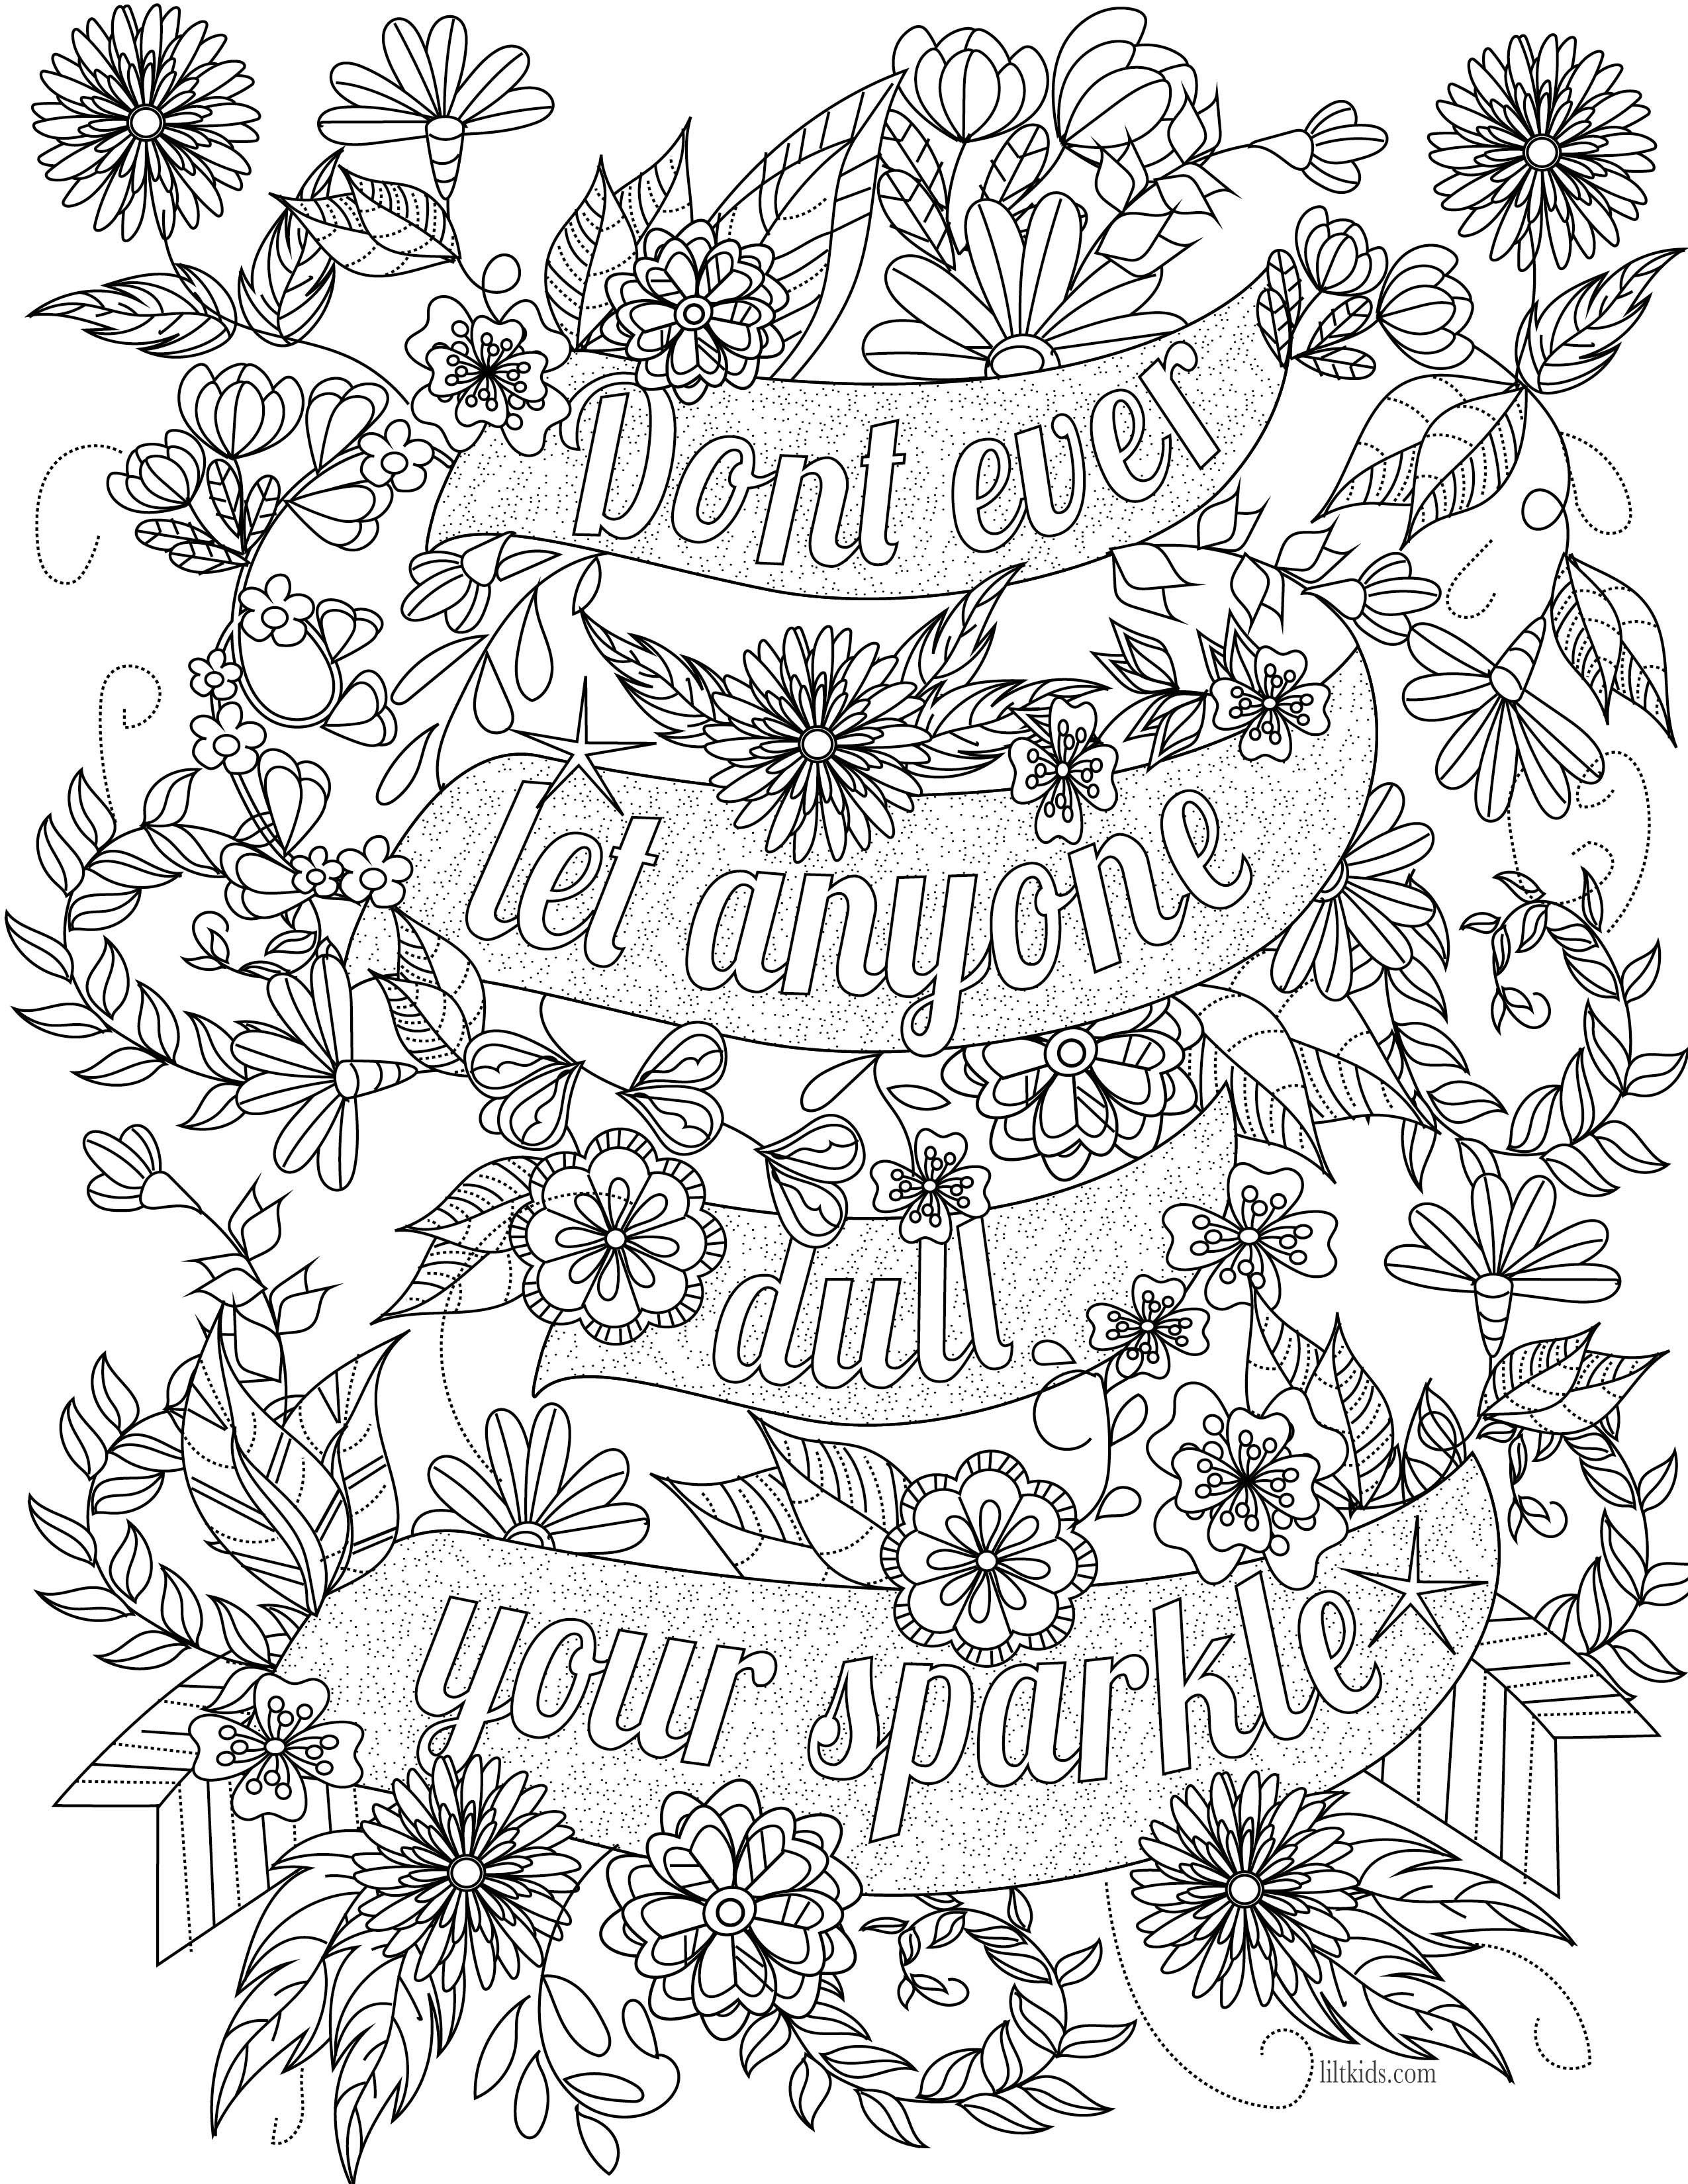 Free Inspirational Quote Adult Coloring Book Image From Liltkids - Free Printable Inspirational Coloring Pages